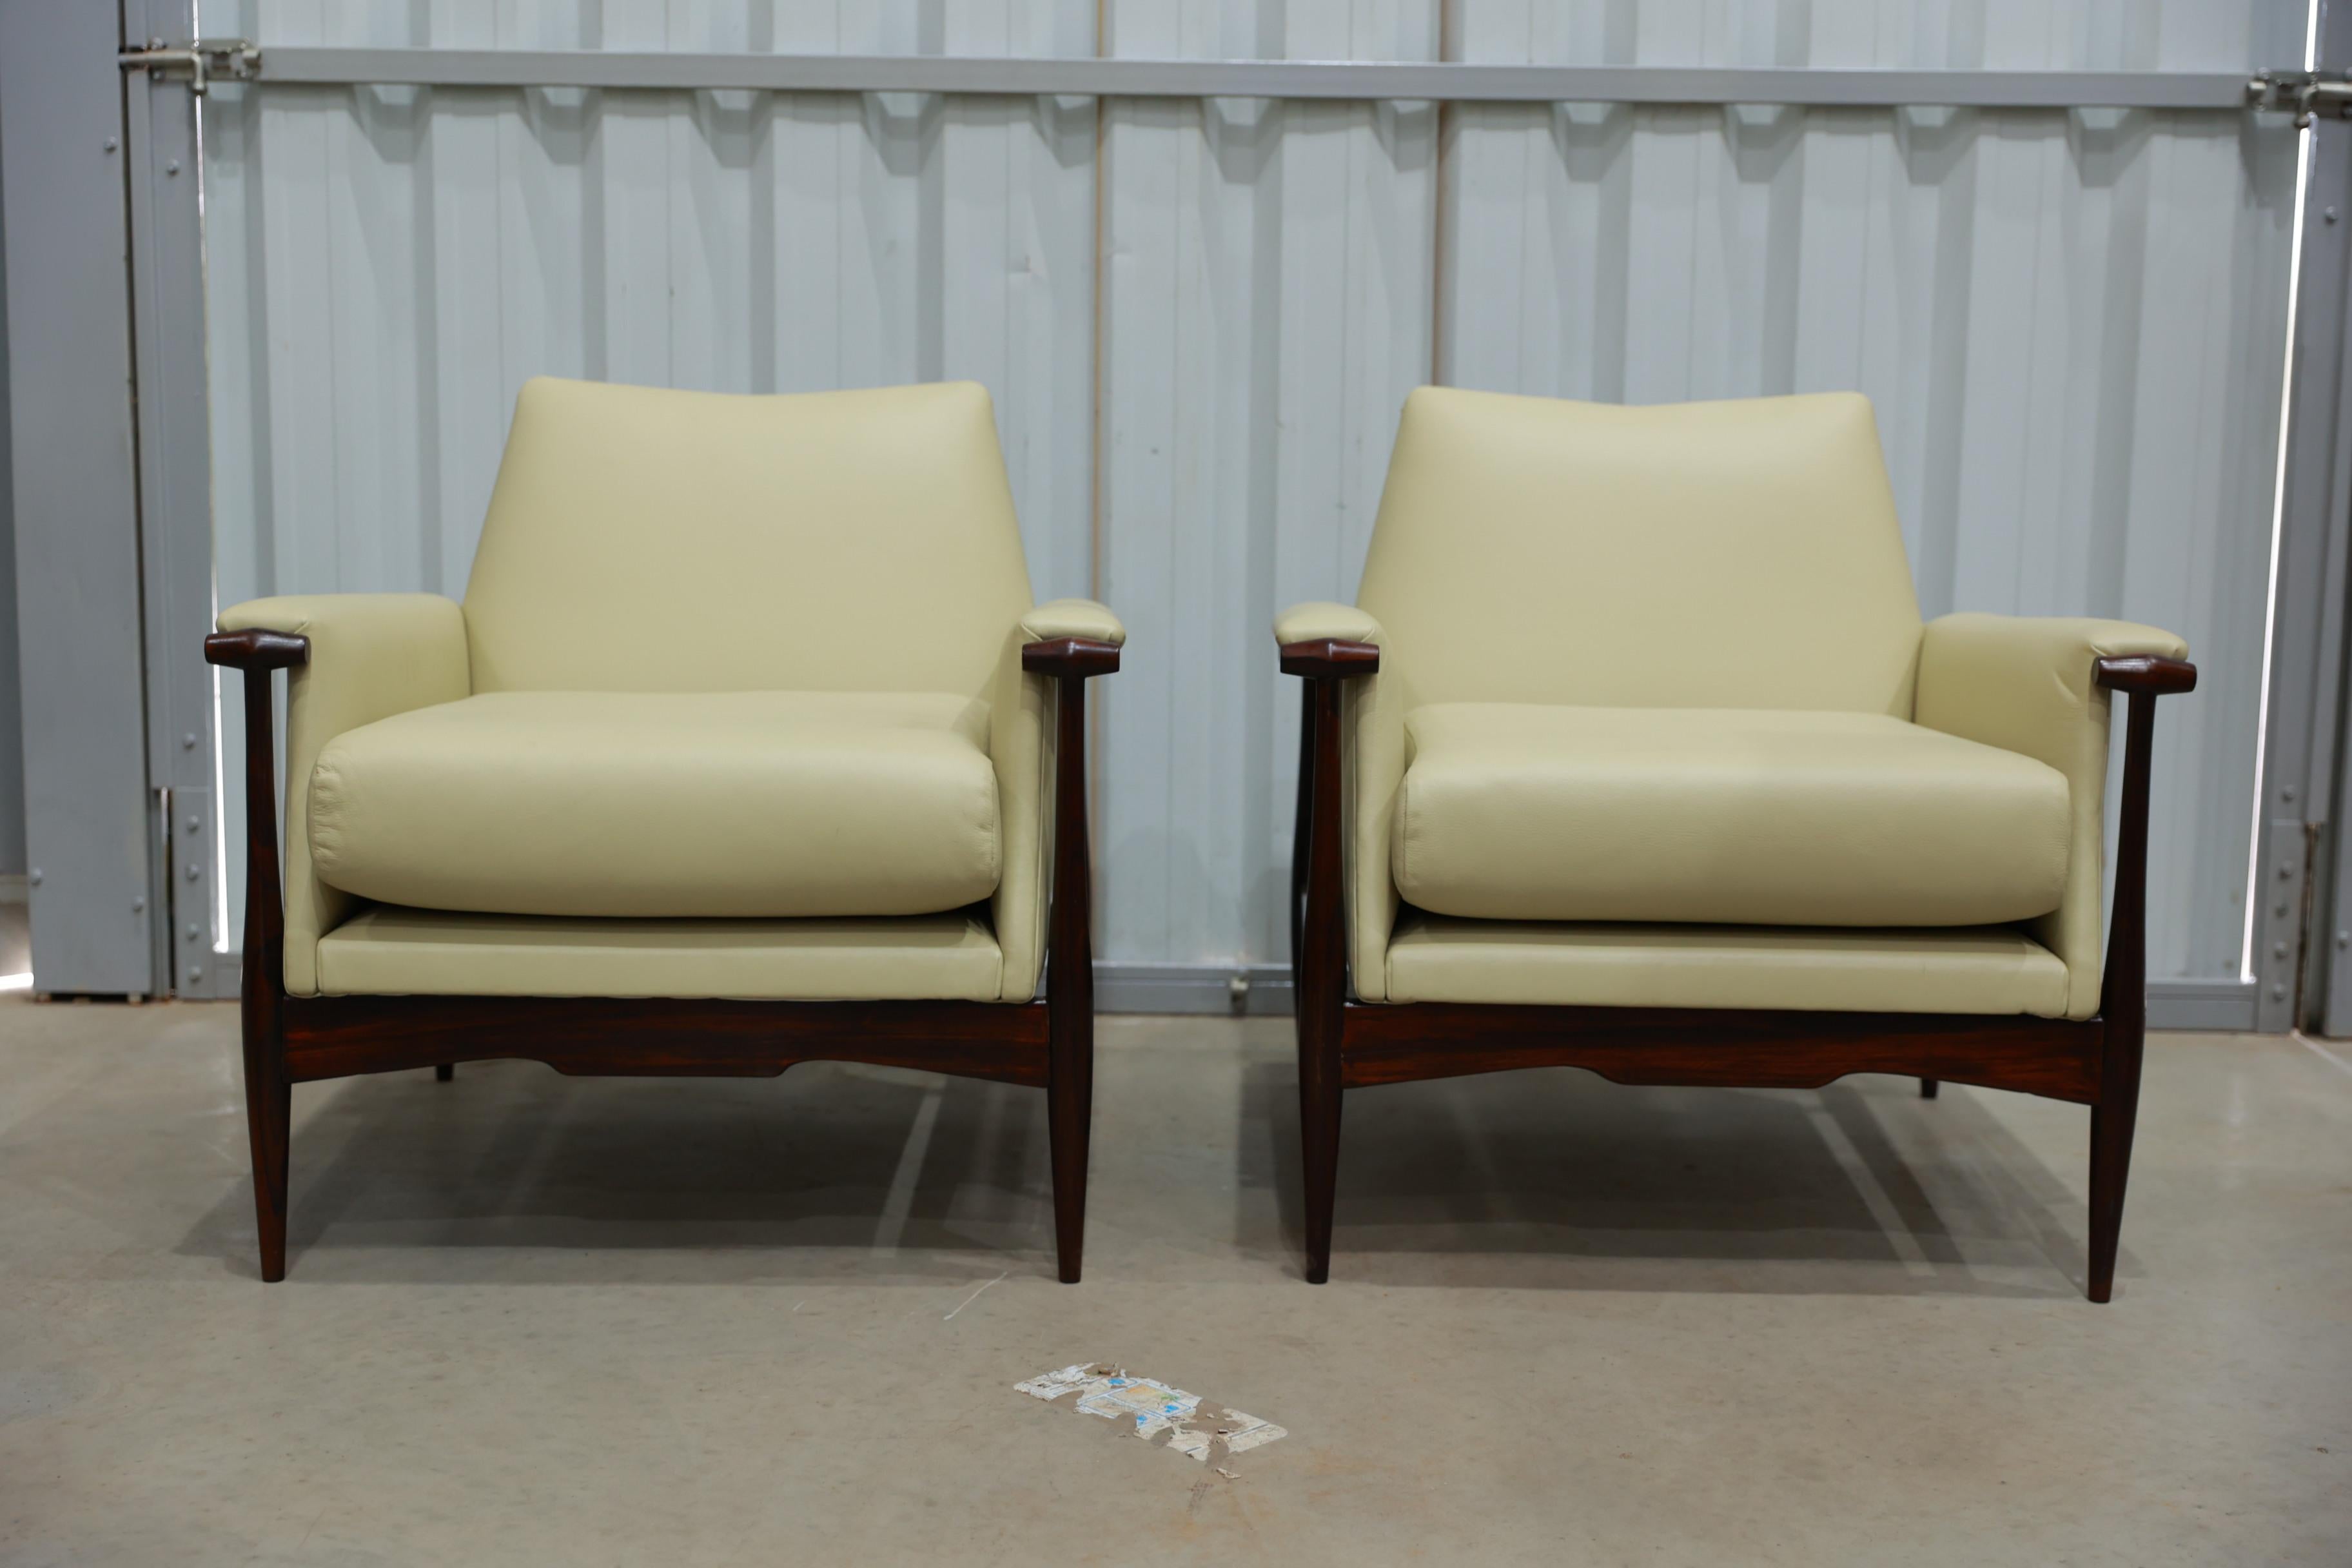 Available today, these Brazilian Modern Armchairs in Hardwood & Leather by Liceu de Artes made in Brazil during the 1960s are nothing less than spectacular!

What makes this mid-century pair of armchairs so special is the sleek design combined with